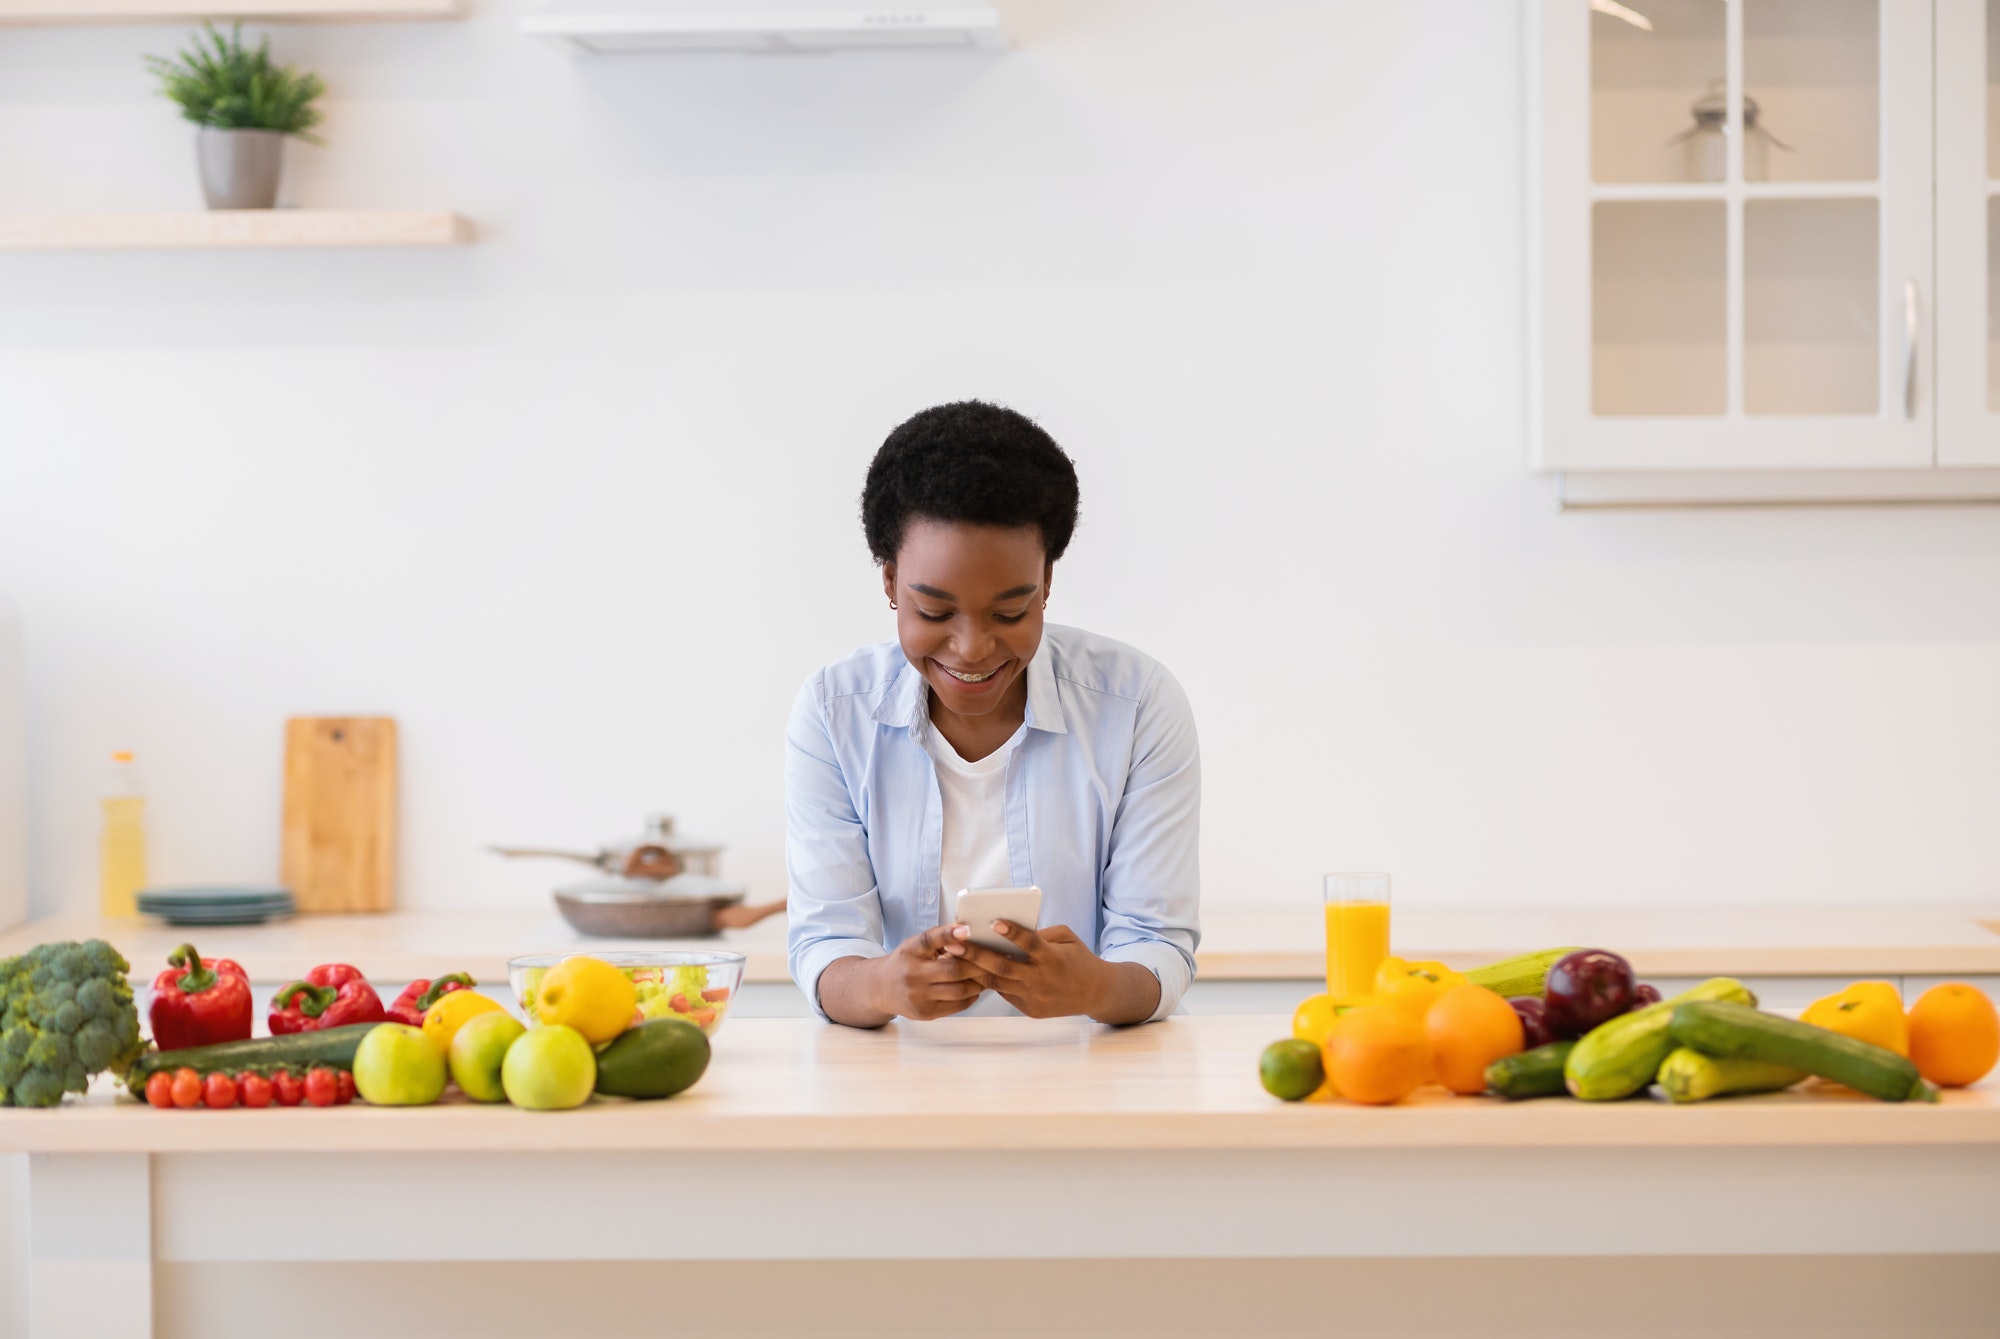 Black Lady Using Cellphone With Weight-Loss App Cooking In Kitchen